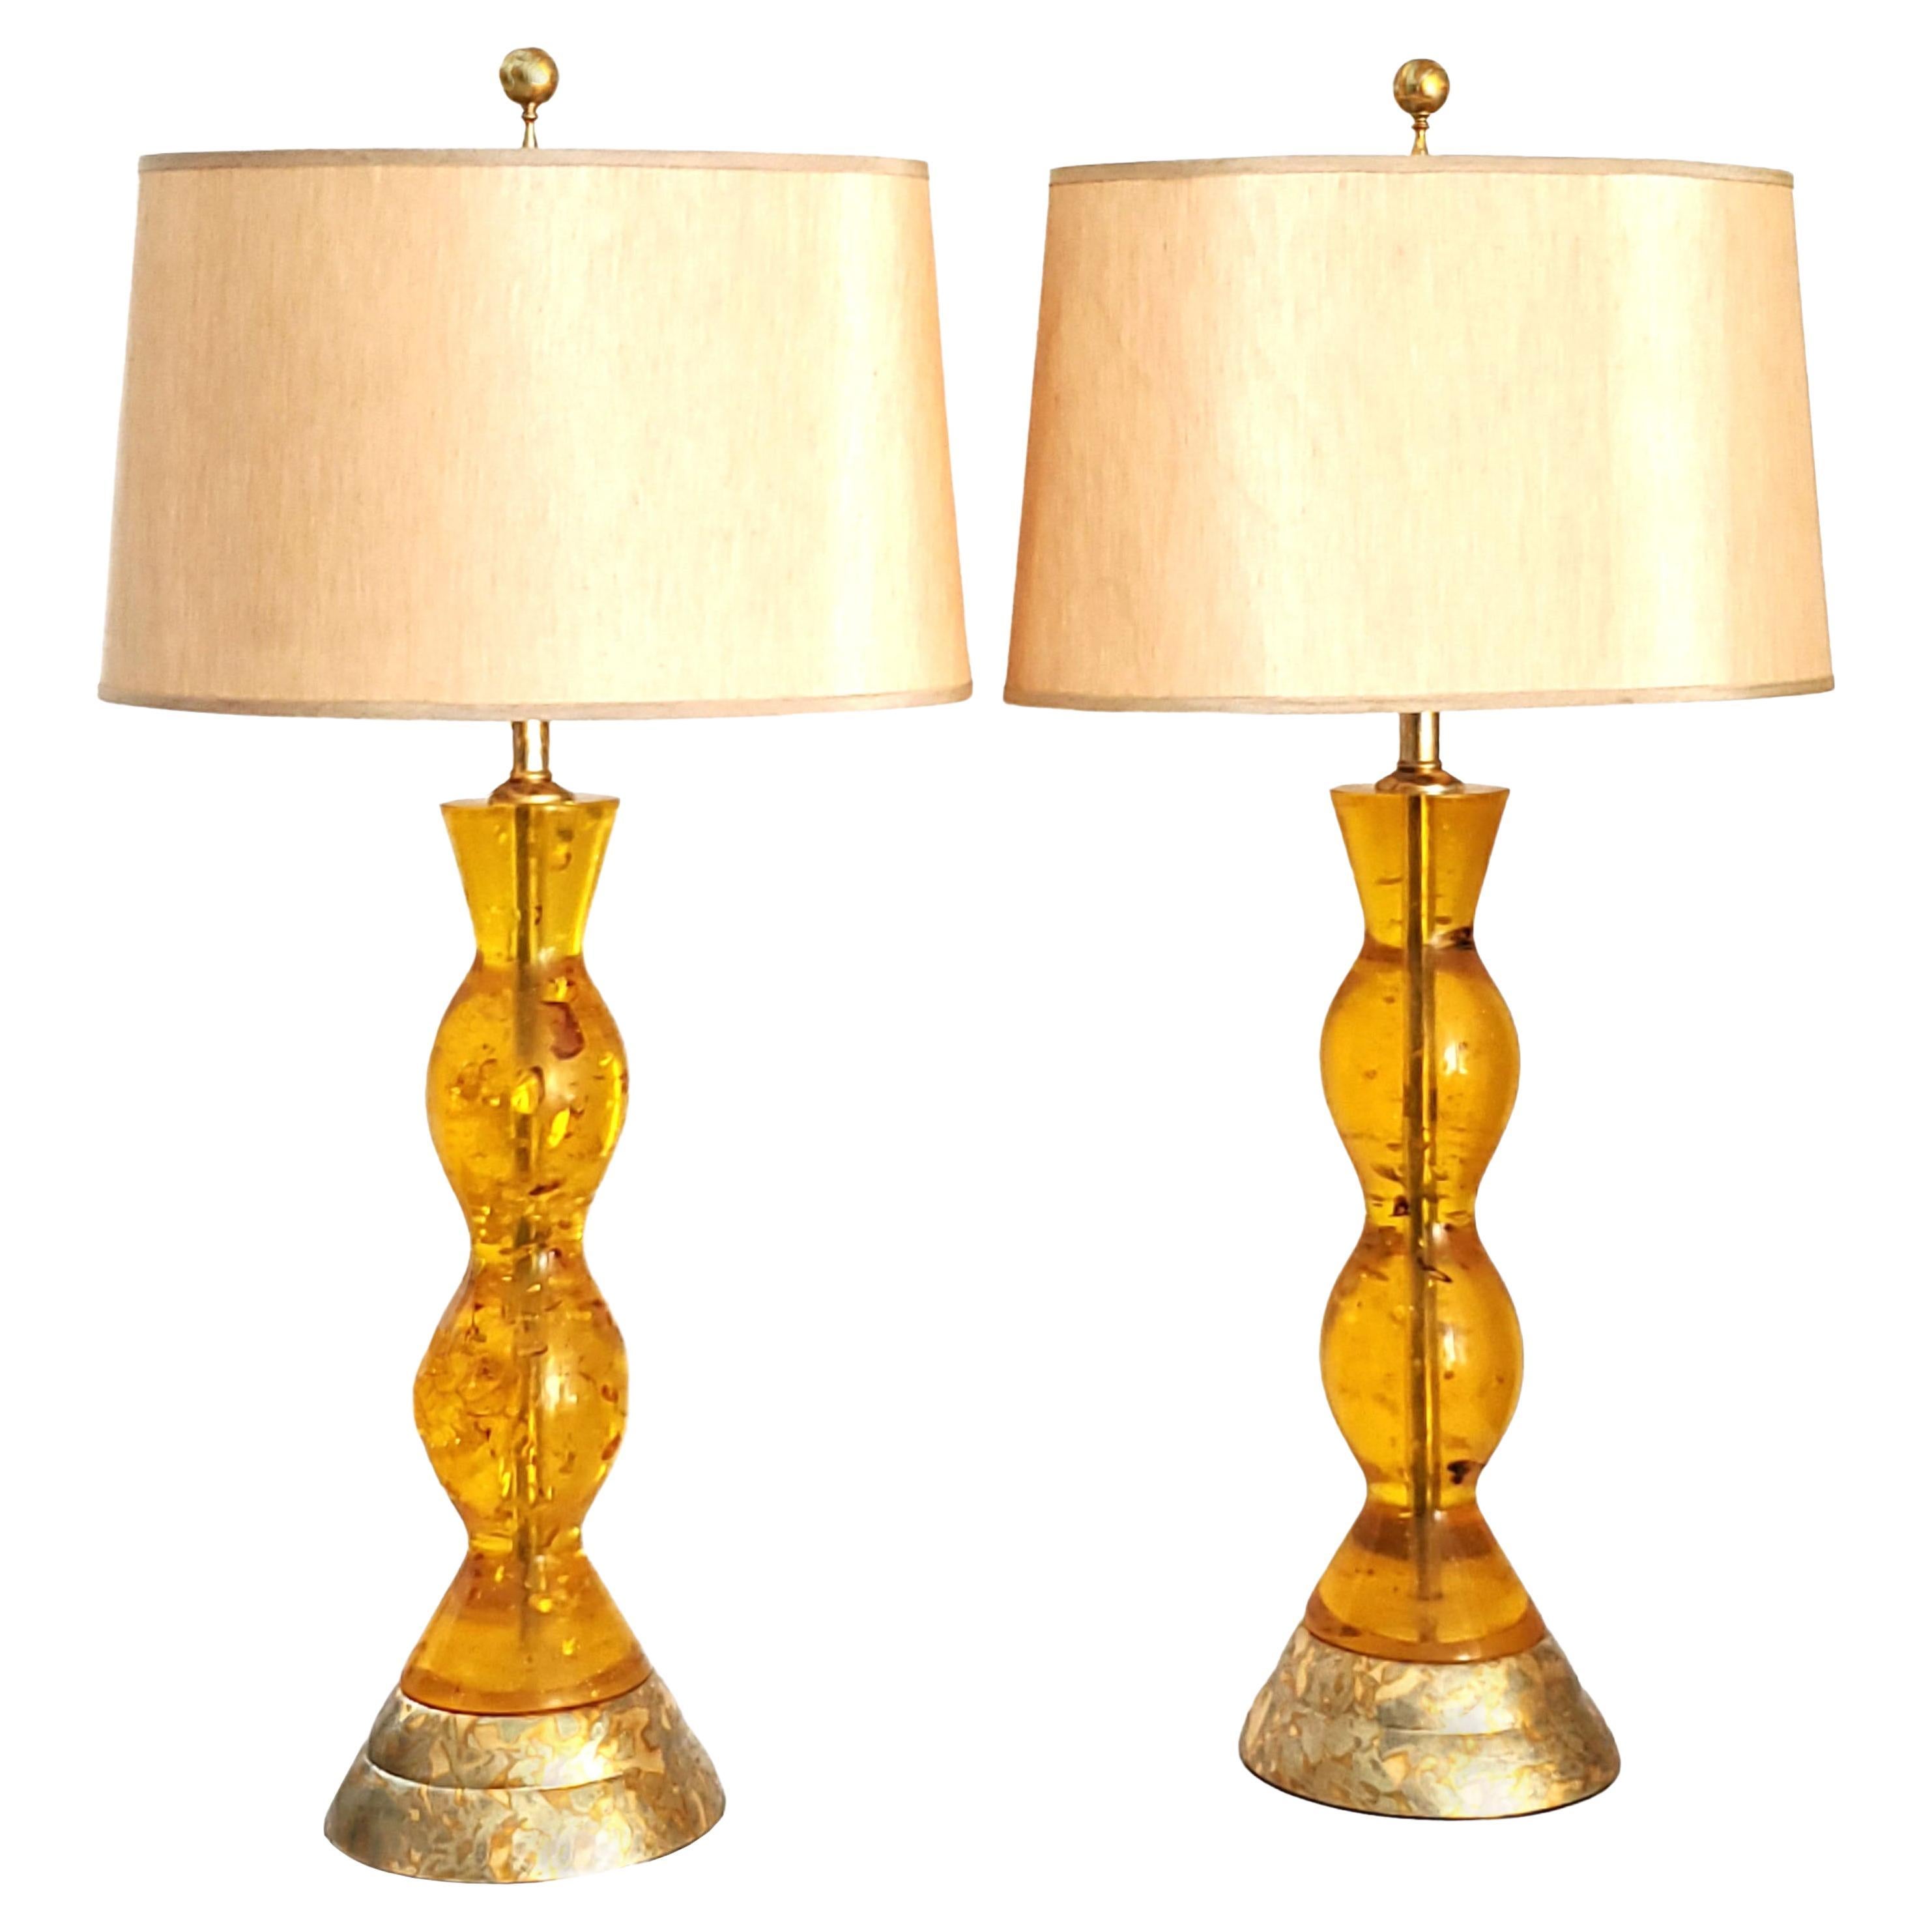 Pierre Giraudon Style Vintage Amber Colored Lucite Table Lamps & Gold Leaf Bases For Sale